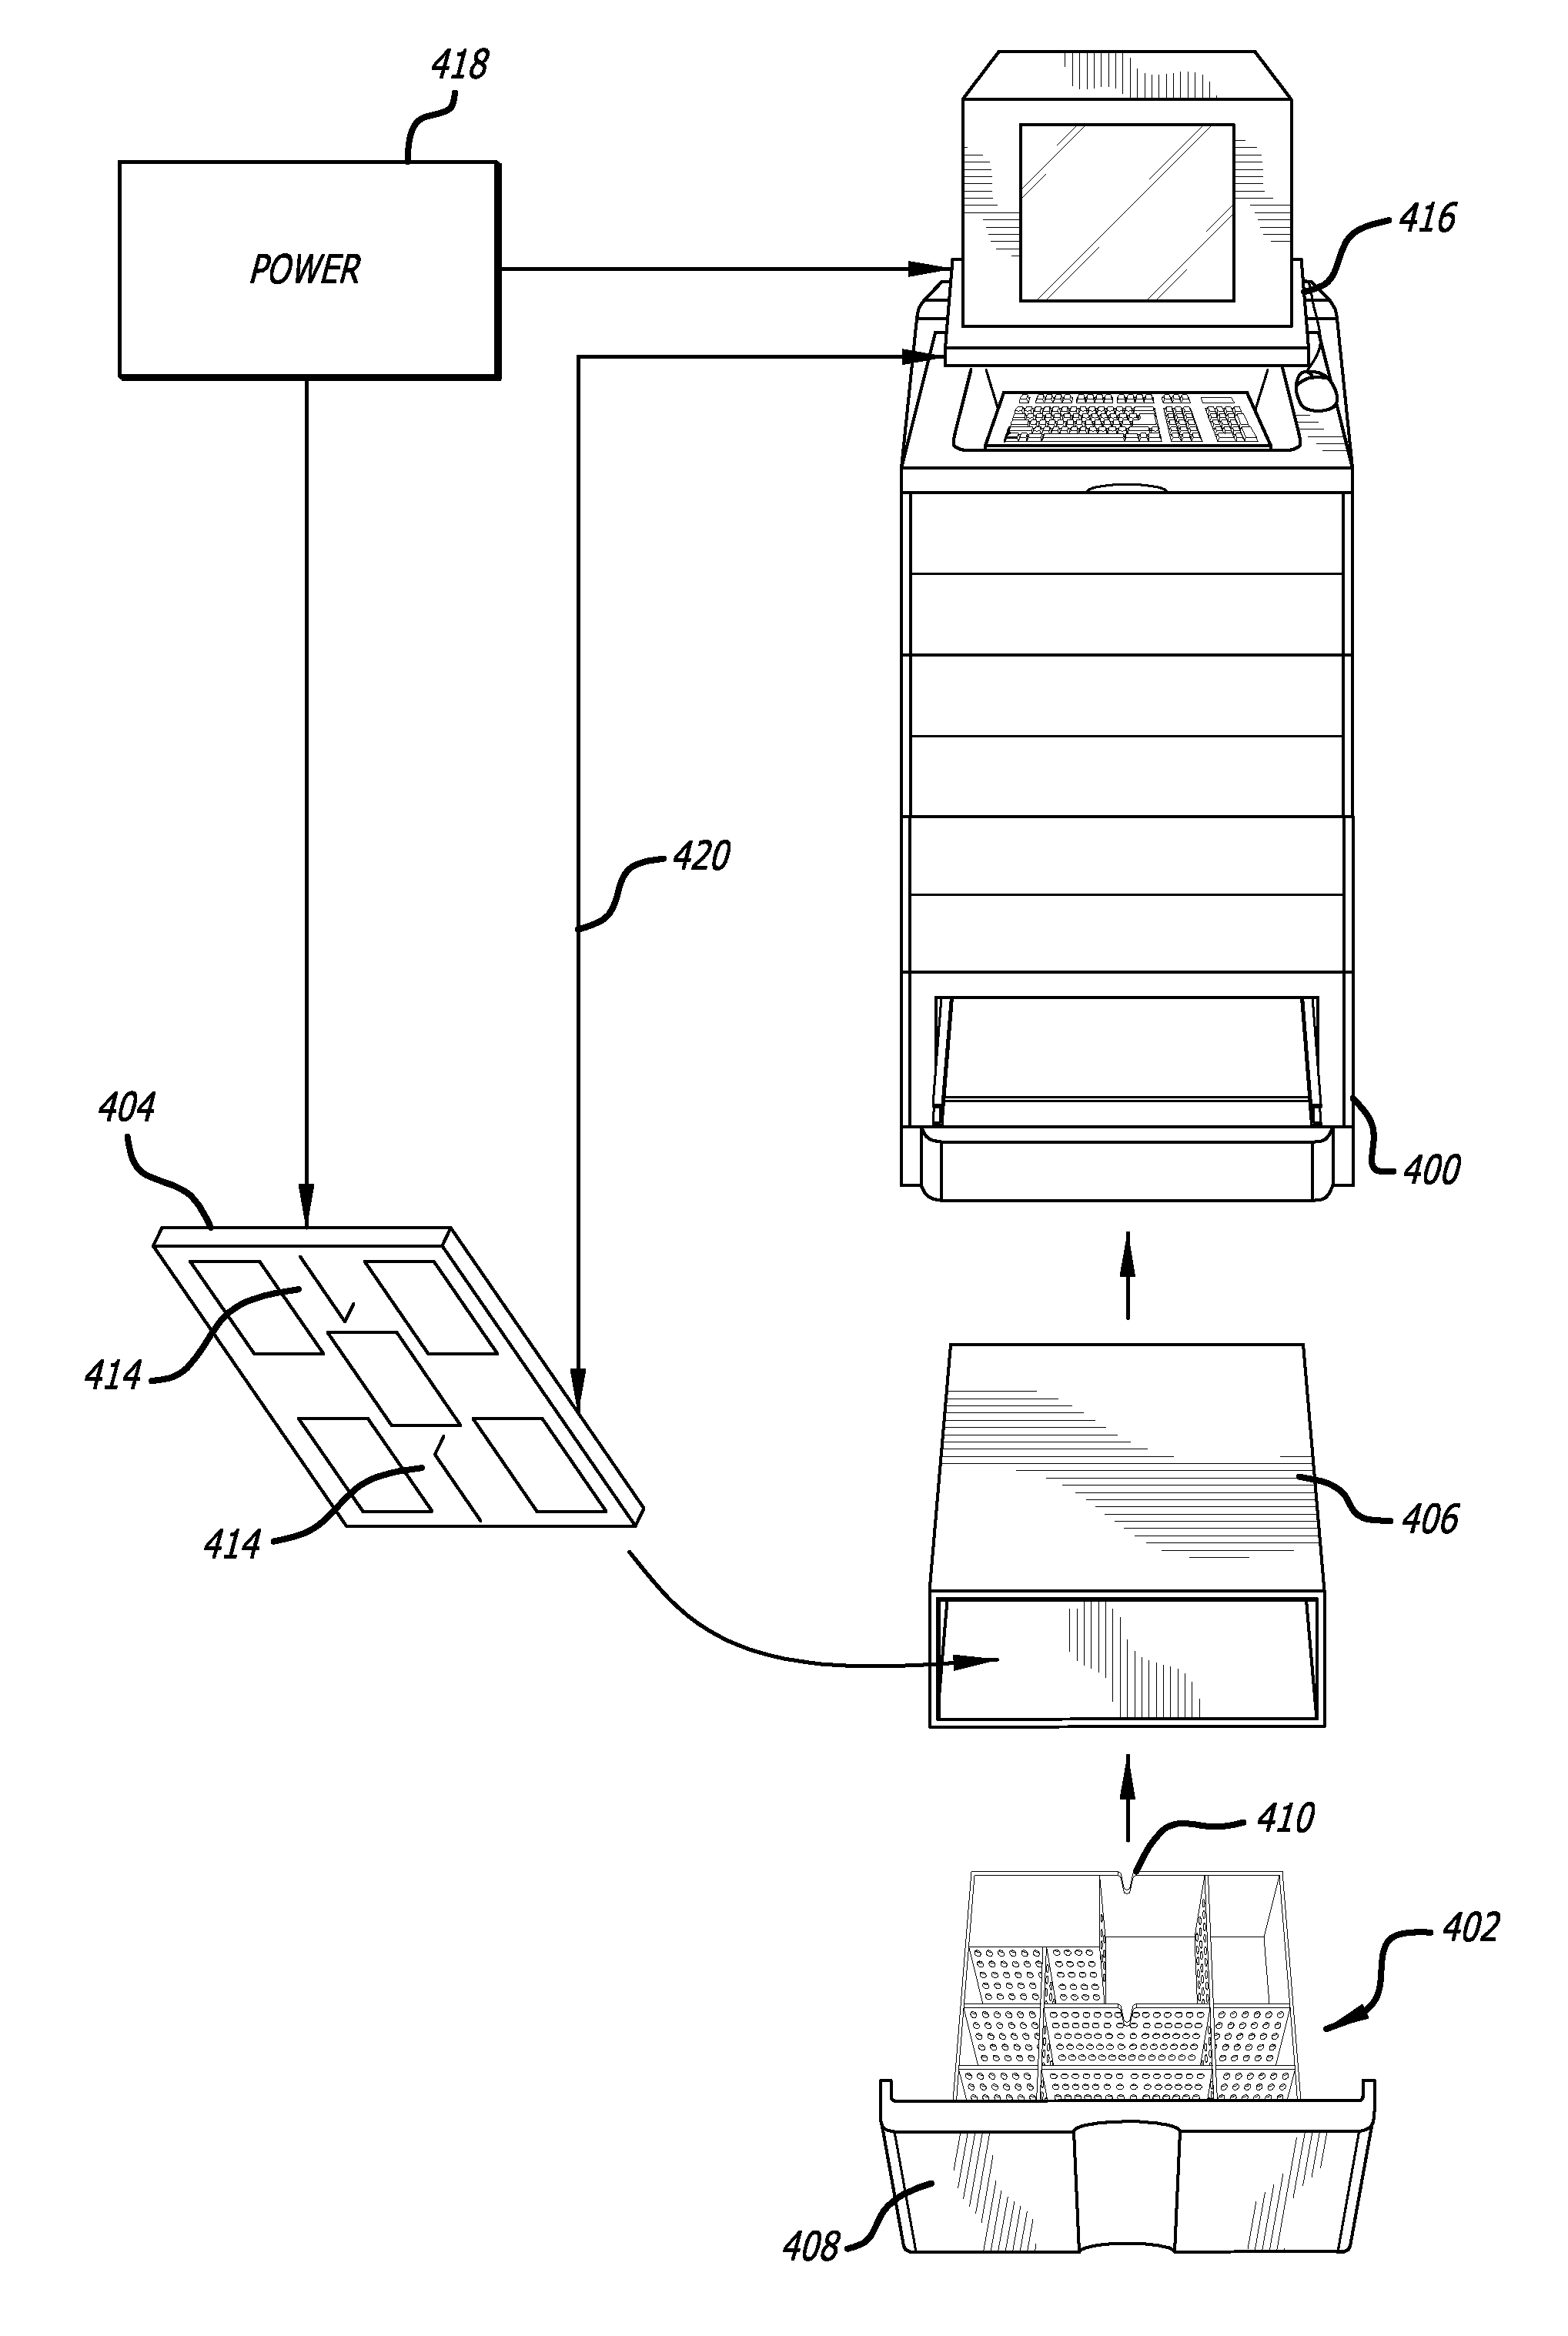 Self-contained RFID-enabled drawer module